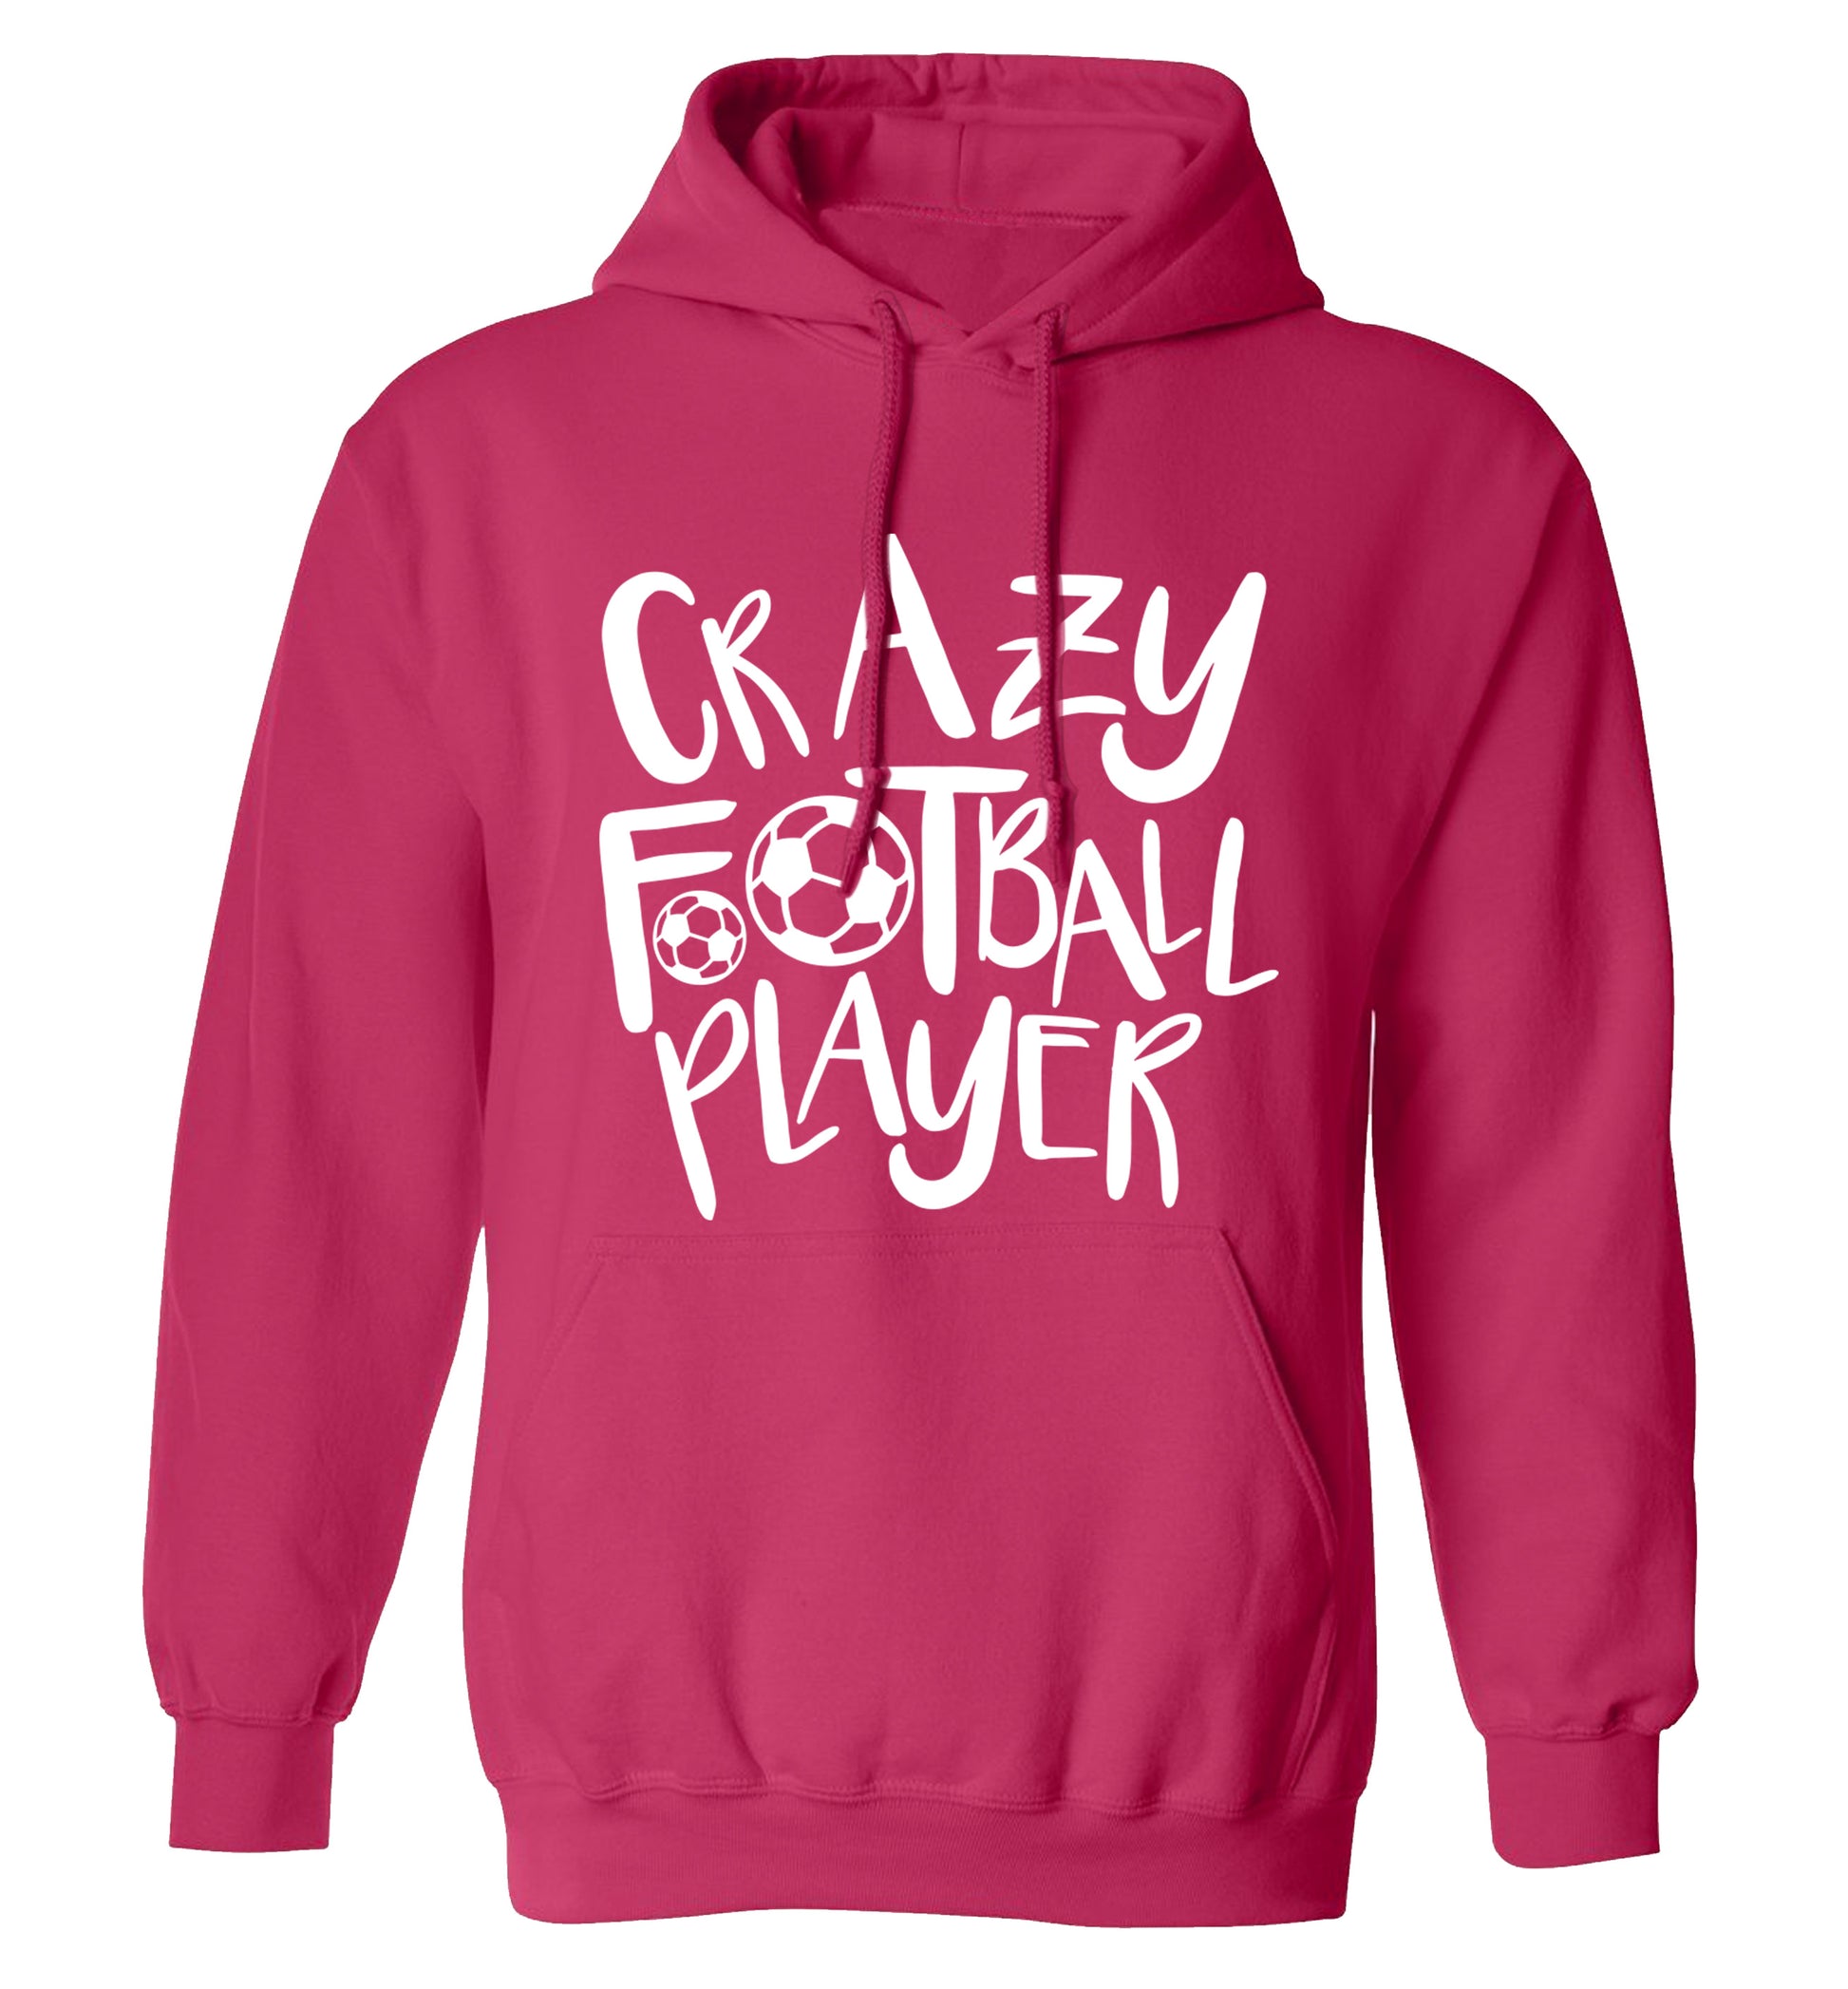 Crazy football player adults unisexpink hoodie 2XL